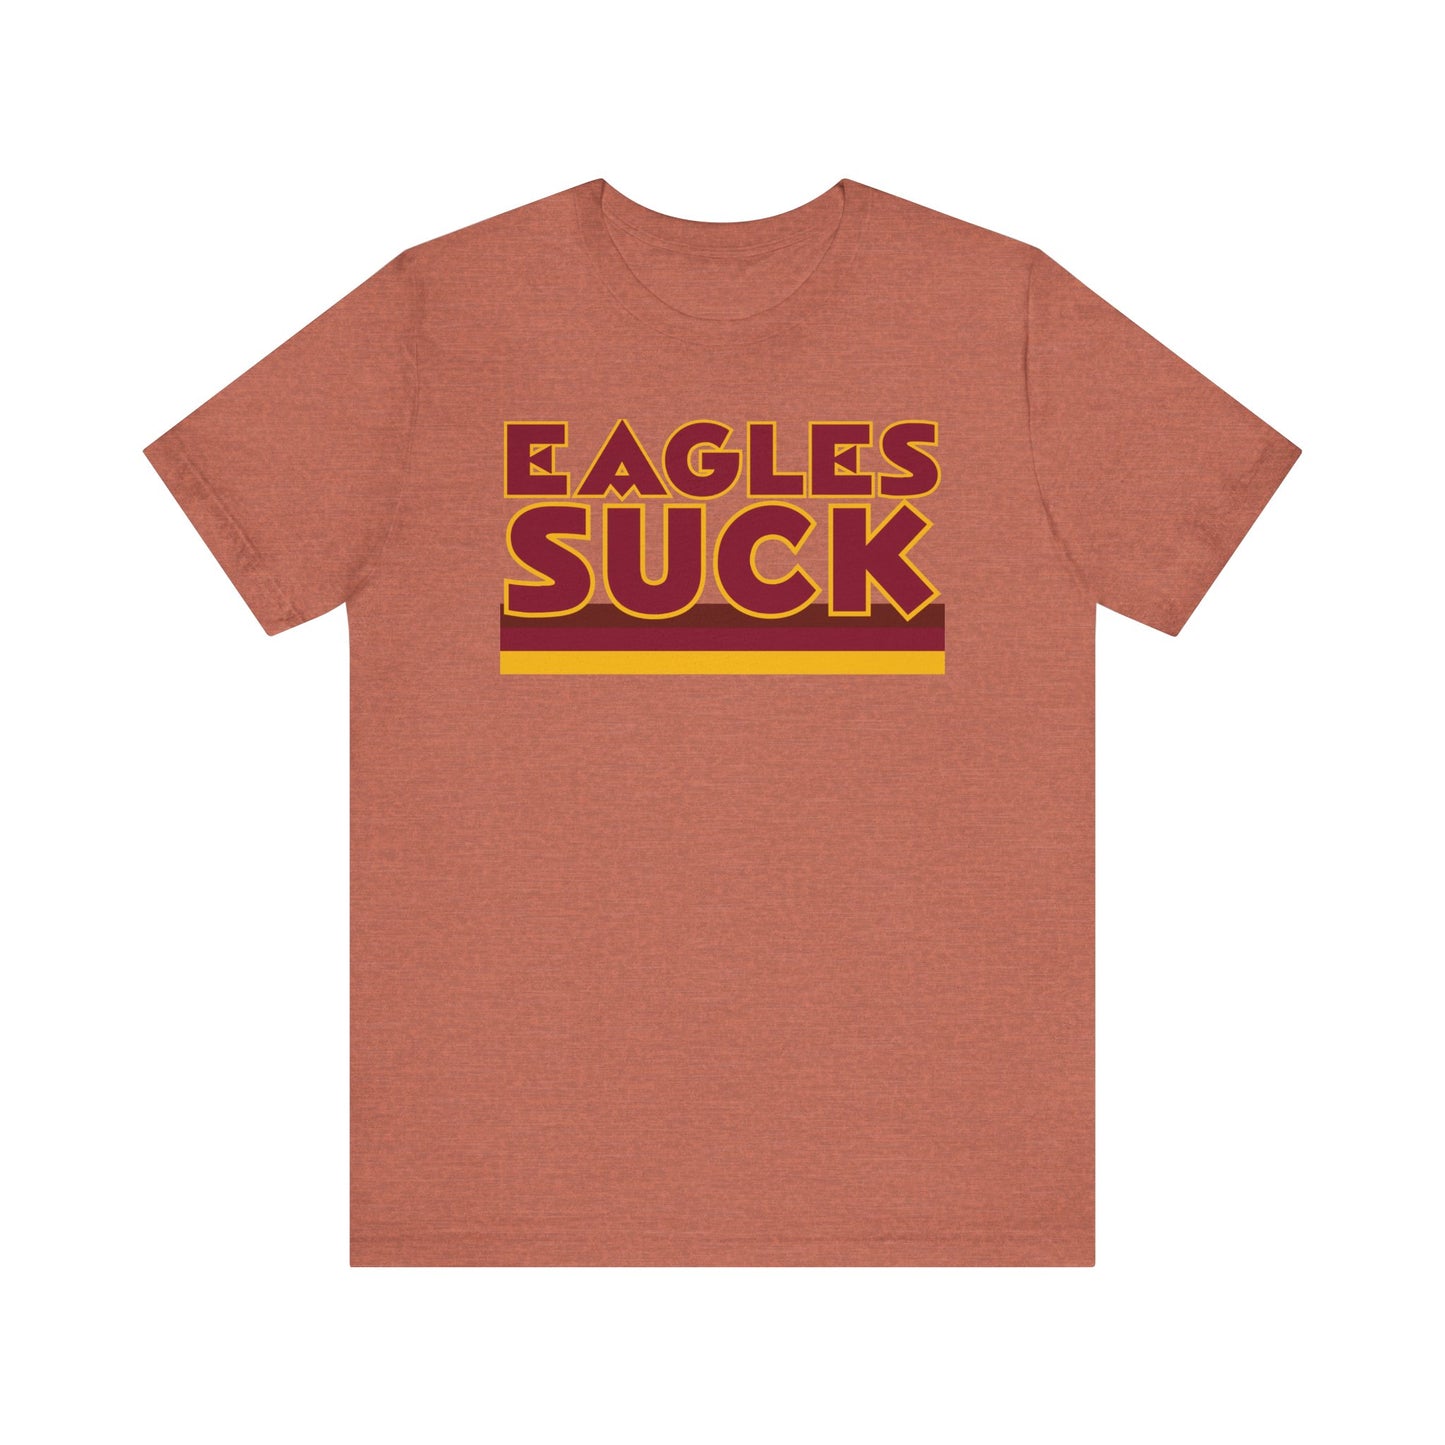 That Birdy Team in PA - Unisex Jersey Short Sleeve Tee